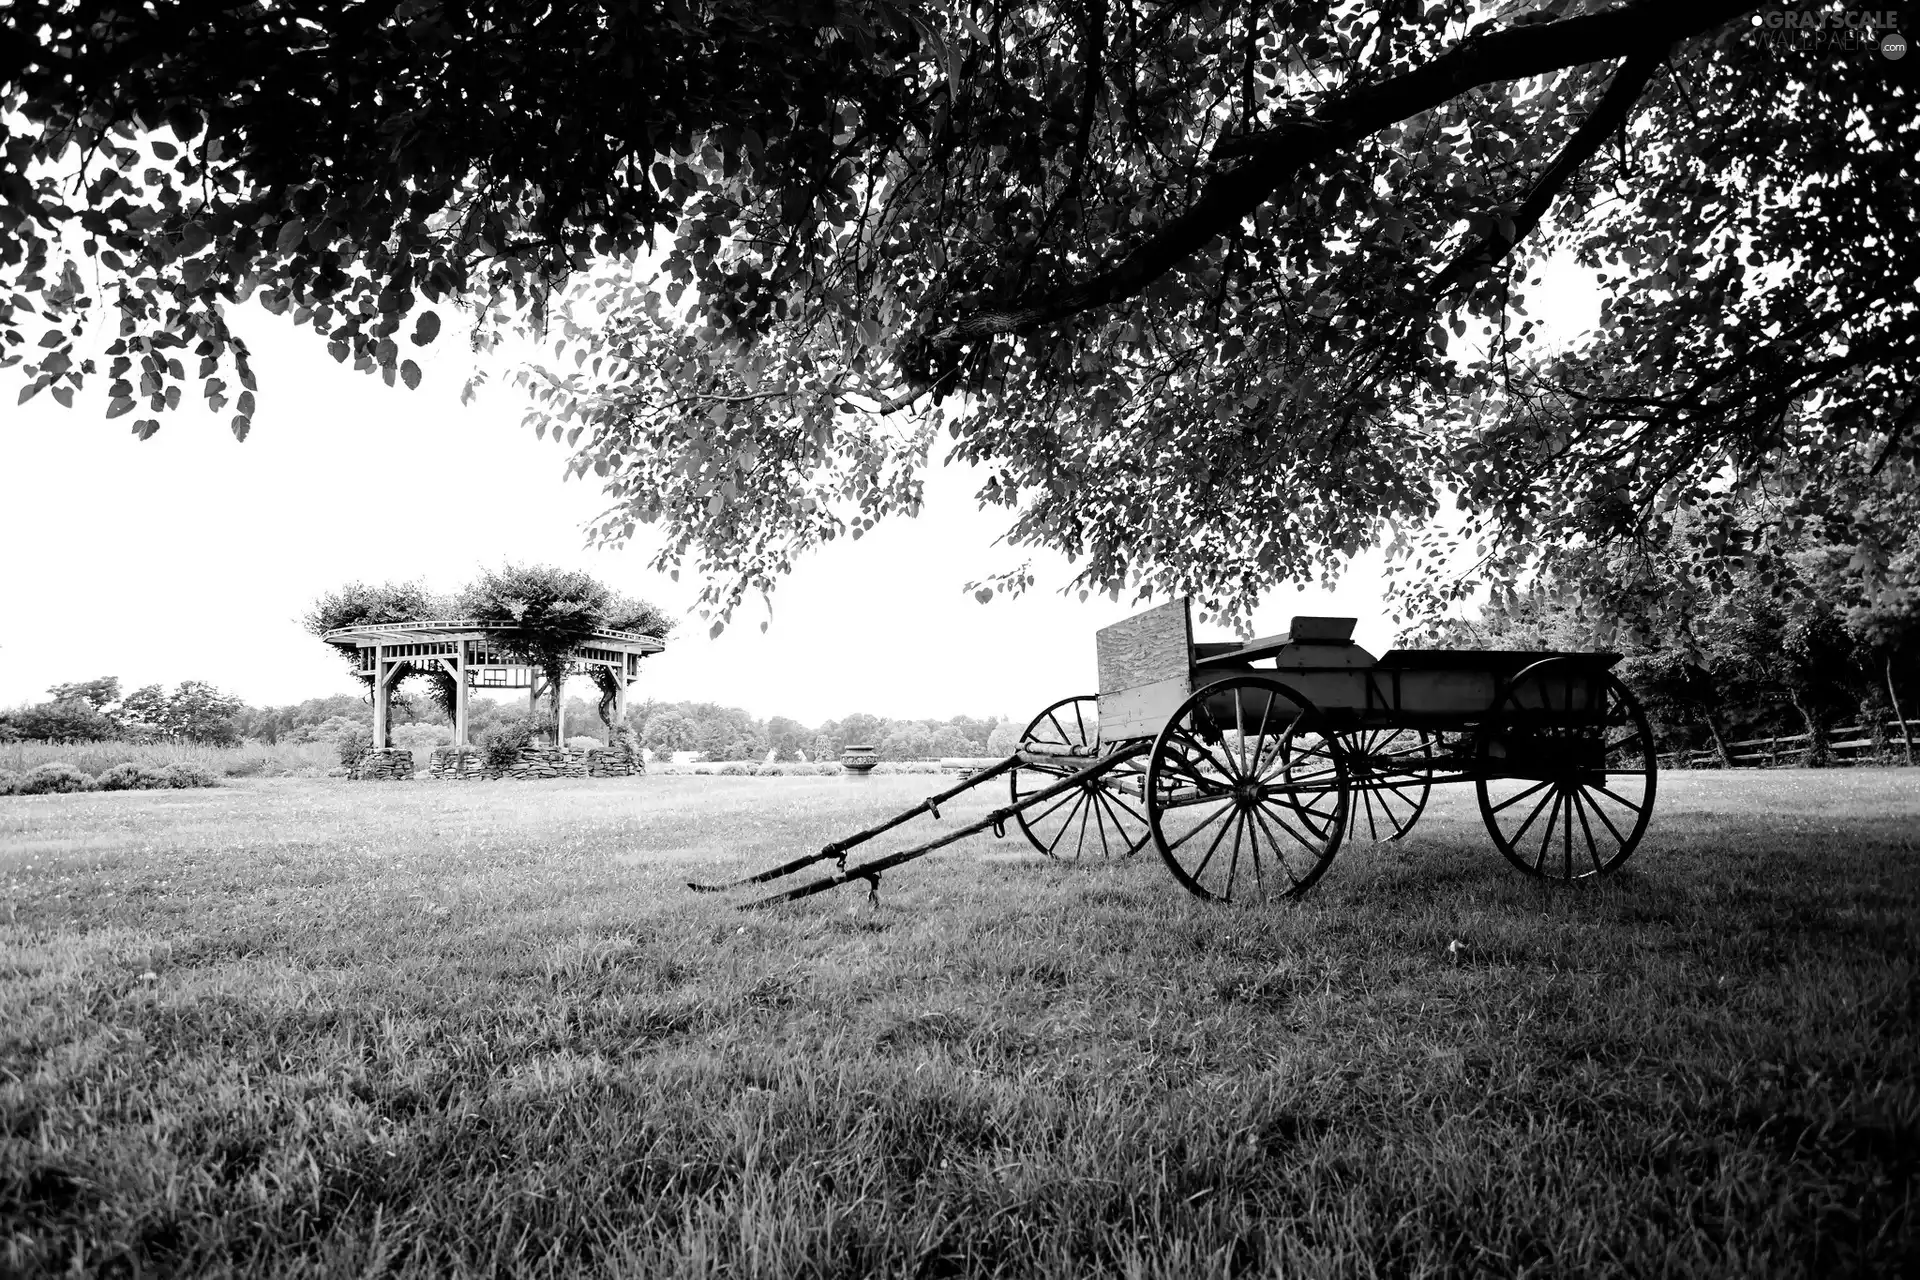 trees, country, arbour, wagon, Meadow